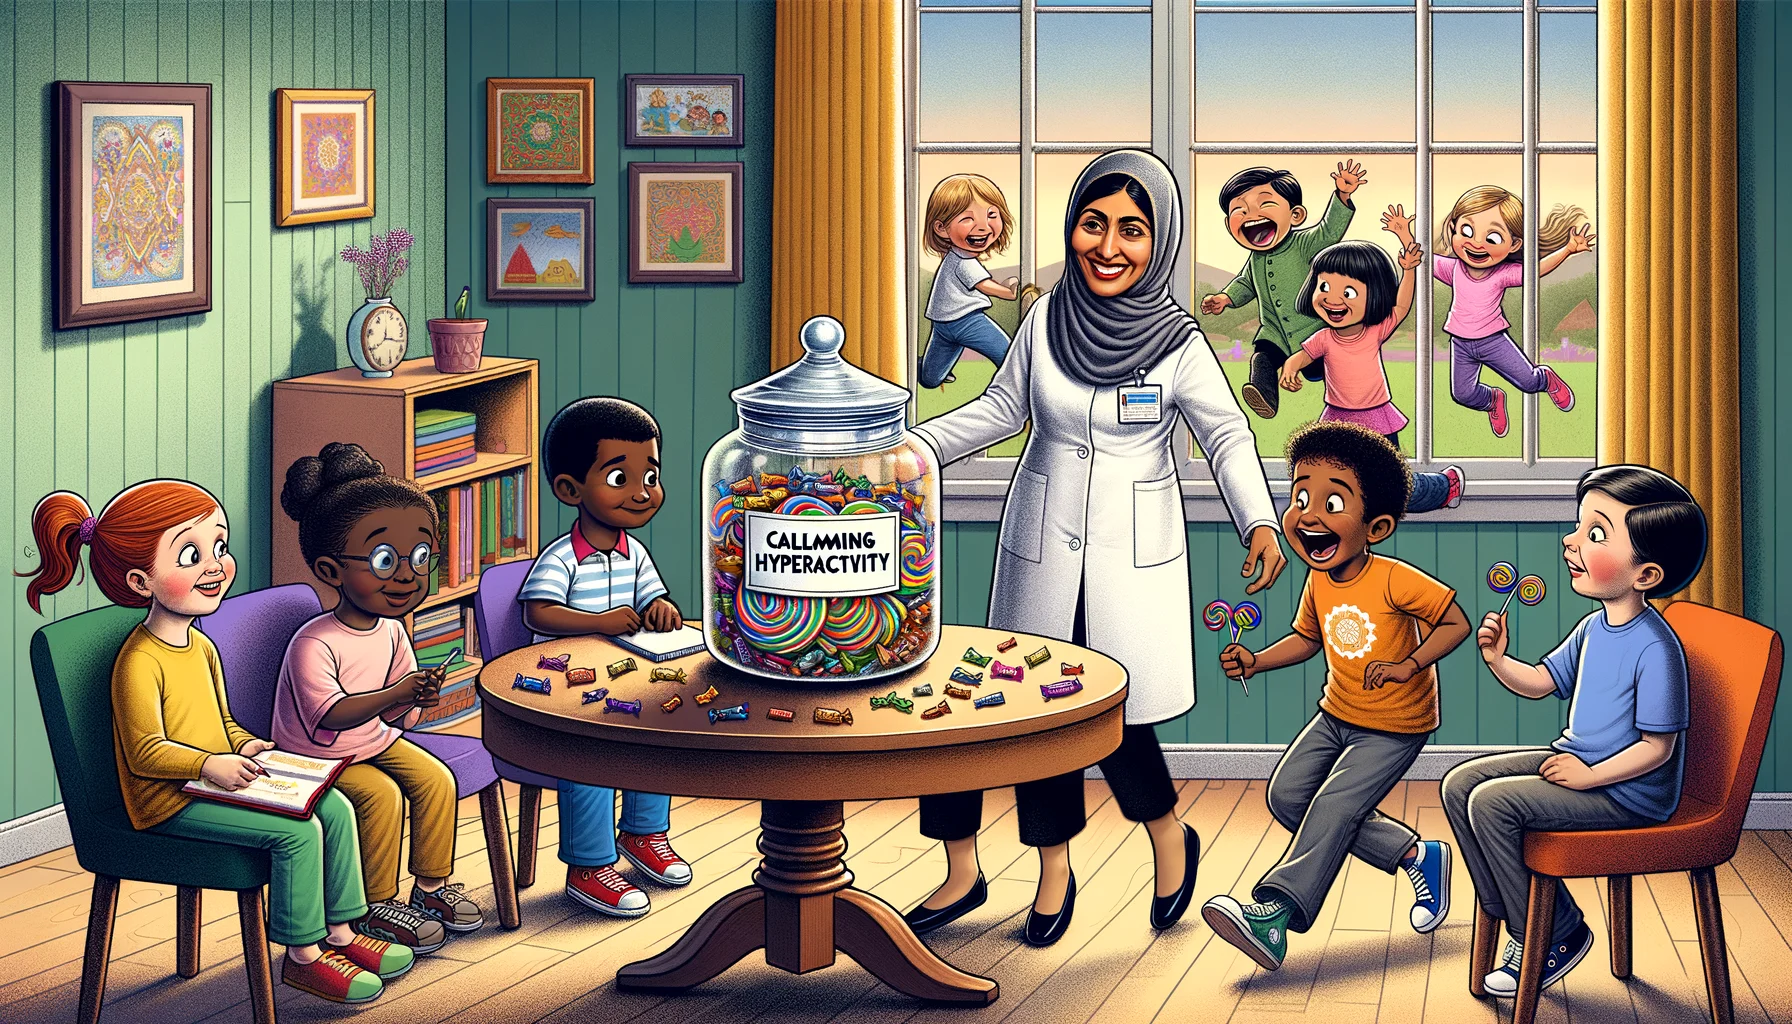 Depict a humorous yet realistic scene where children of different descents, two Caucasian boys, an Hispanic girl, a Middle-Eastern boy and a black girl, are hyperactive and hopping around a room decorated with bright colors. In the middle of this room stands a round table with a large transparent jar labeled 'Candy for Calming Hyperactivity'. A South Asian woman in a professional attire is smiling and handing out these special candies from the jar to the children. The children instantly calm down and can be seen sitting quietly, reading books and painting, with the candy in their hands.